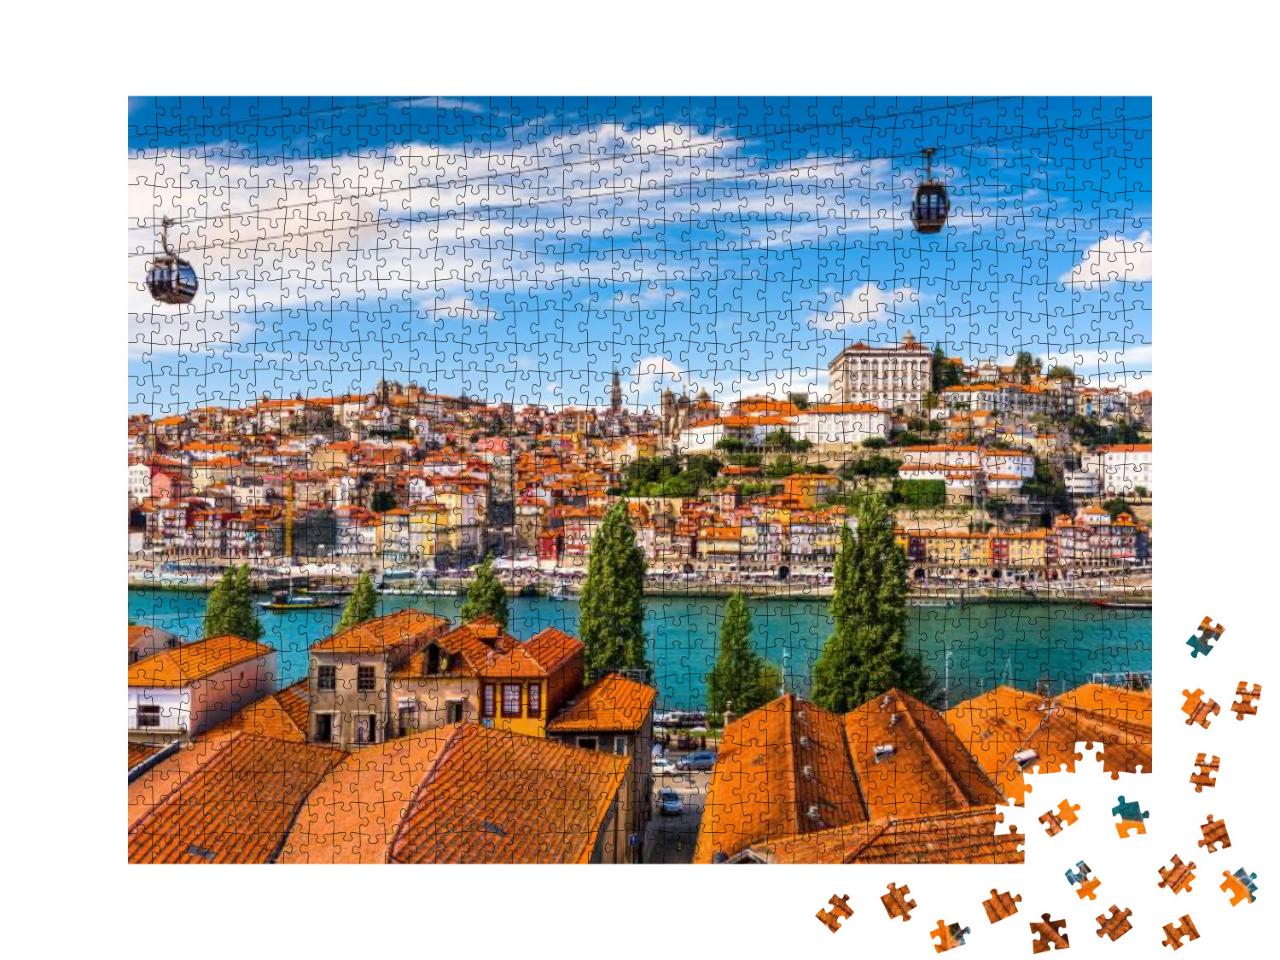 Porto, Portugal Old Town on the Douro River... Jigsaw Puzzle with 1000 pieces